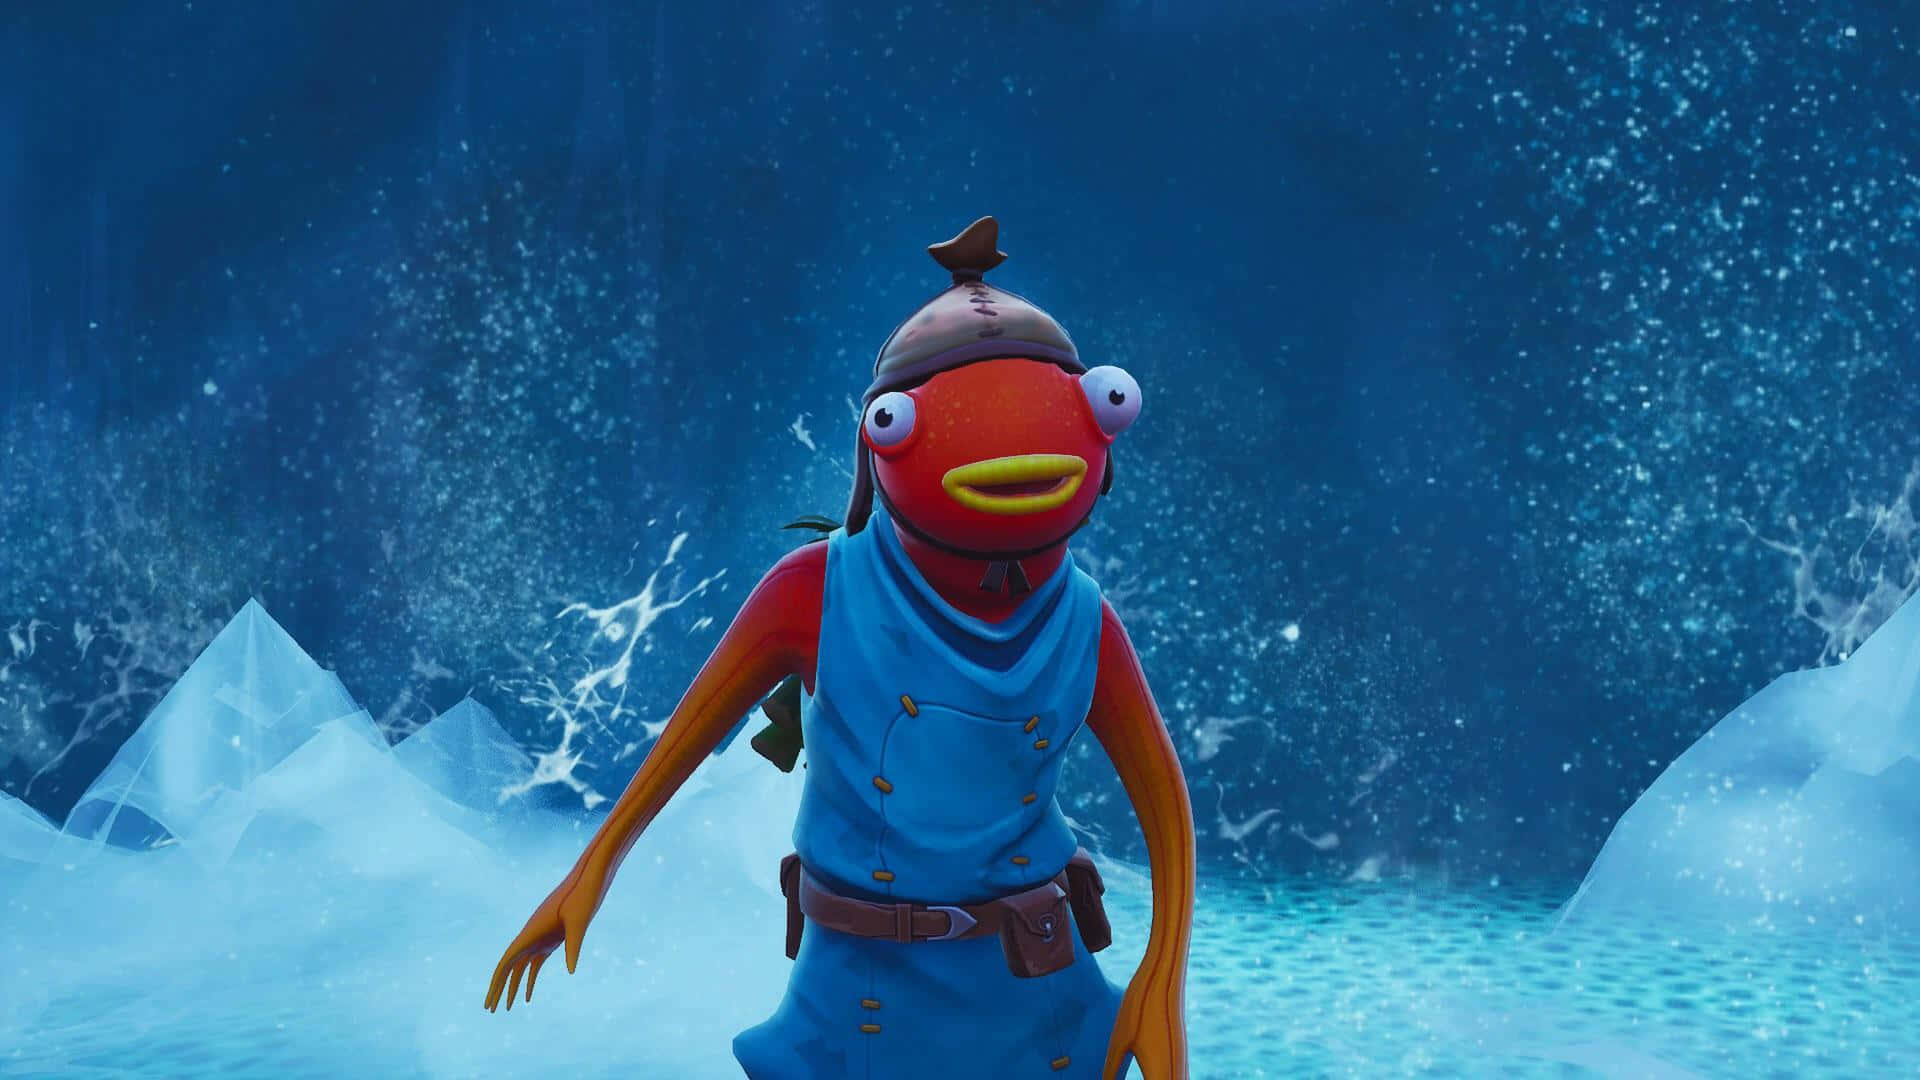 Grab the freshest Fishstick to stay ahead of the competition in Fortnite Wallpaper